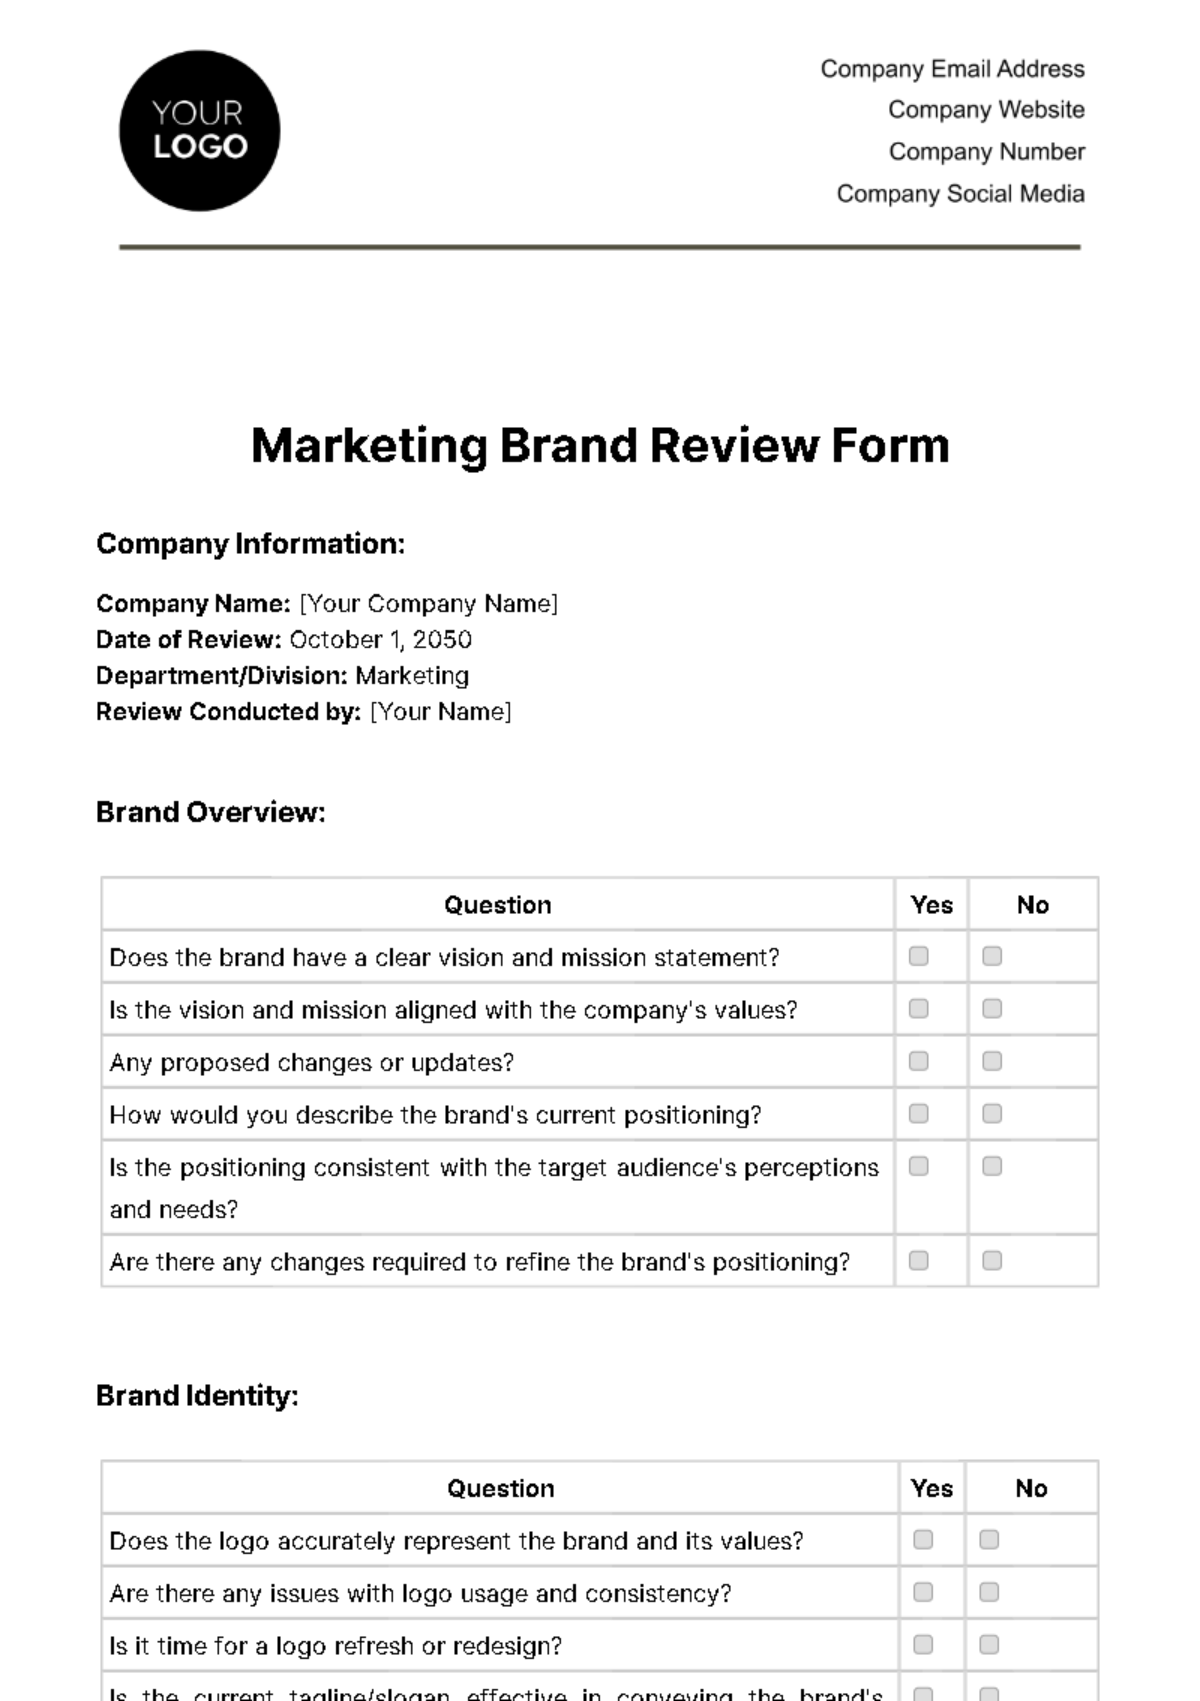 Marketing Brand Review Form Template